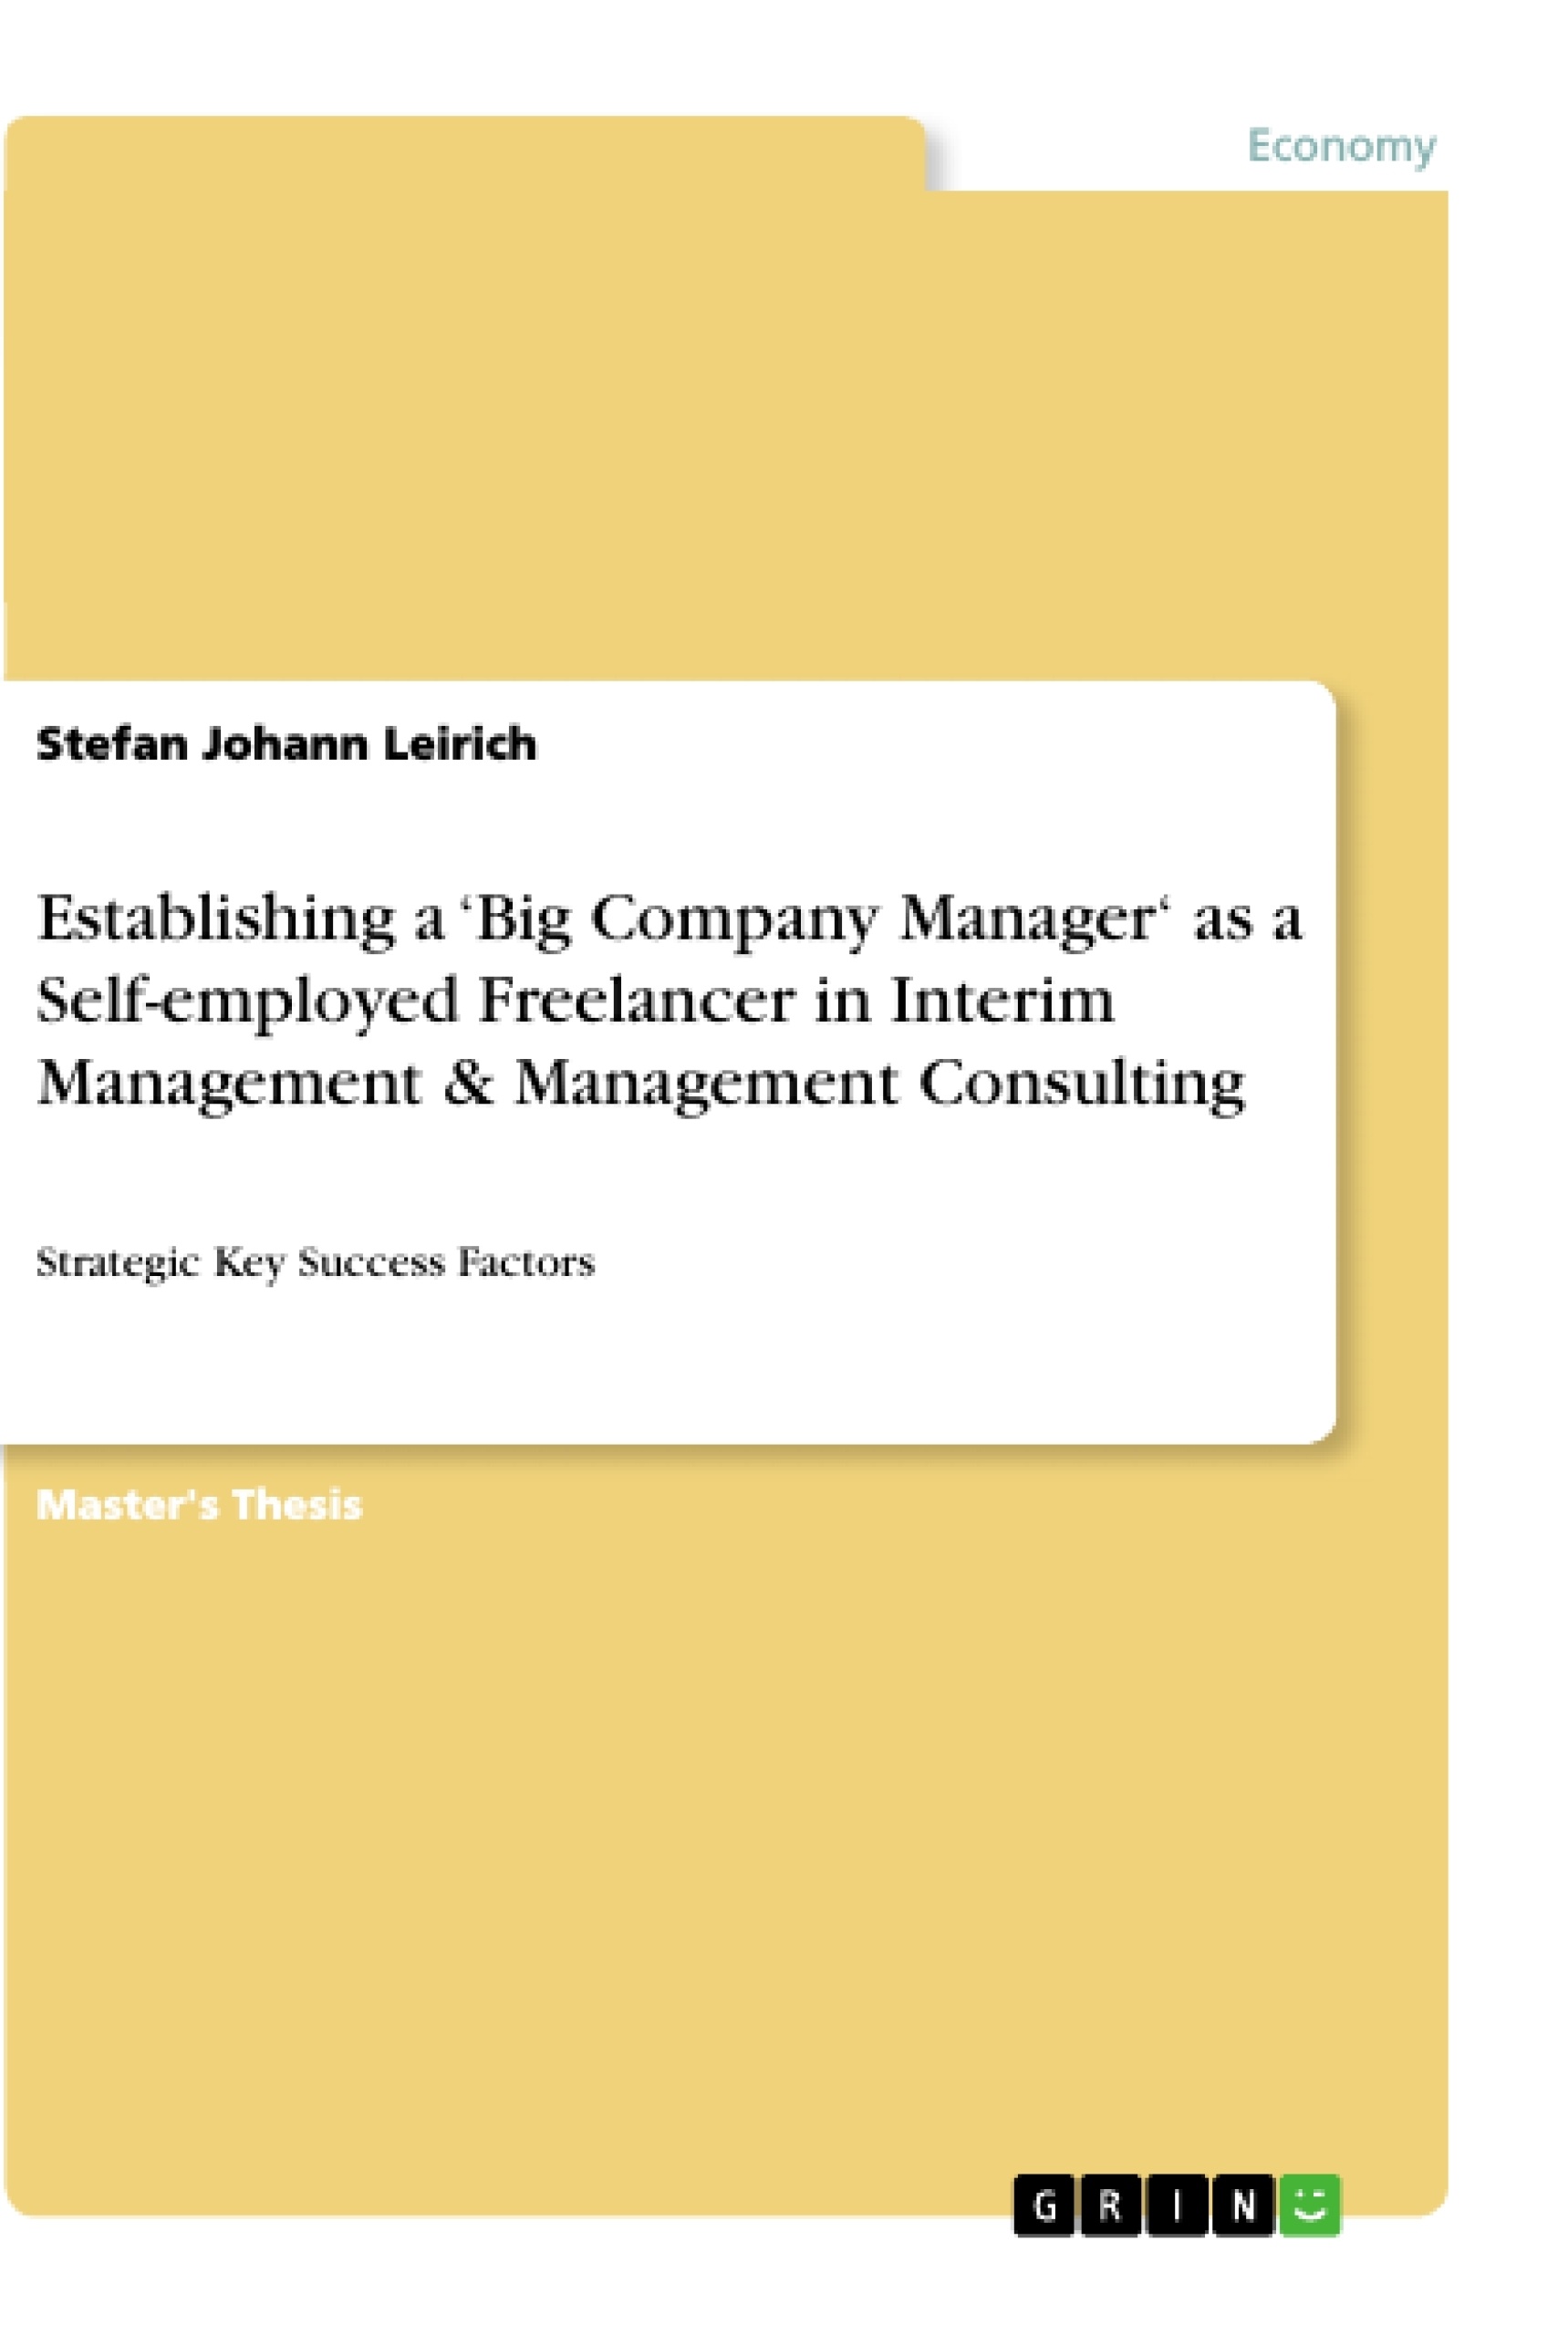 Title: Establishing a ‘Big Company Manager‘ as a Self-employed Freelancer in Interim Management & Management Consulting